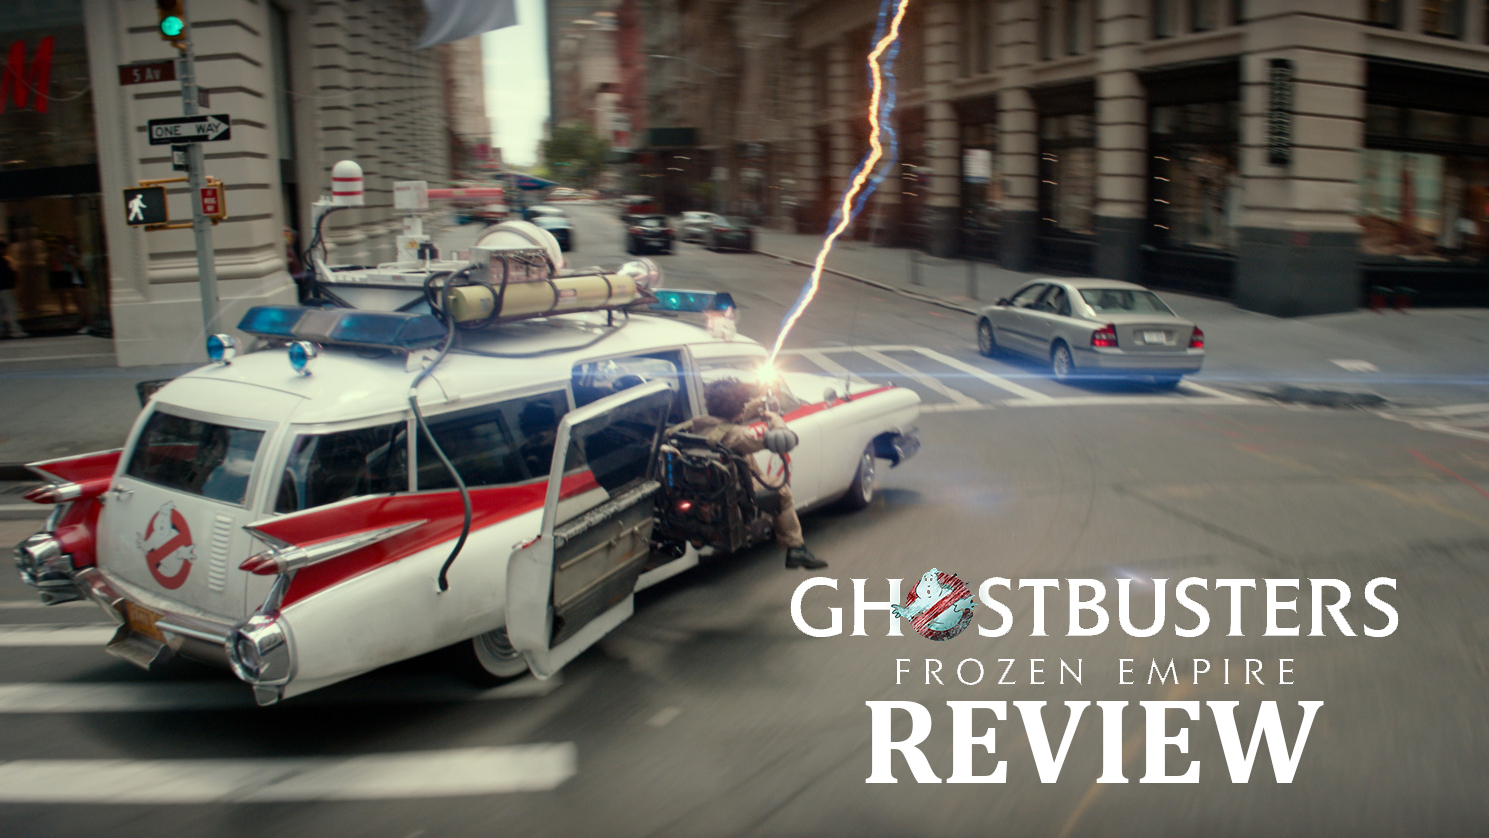 GHOSTBUSTERS: FROZEN EMPIRE Review – Busting Ghosts Is Freaky and Fun Once Again